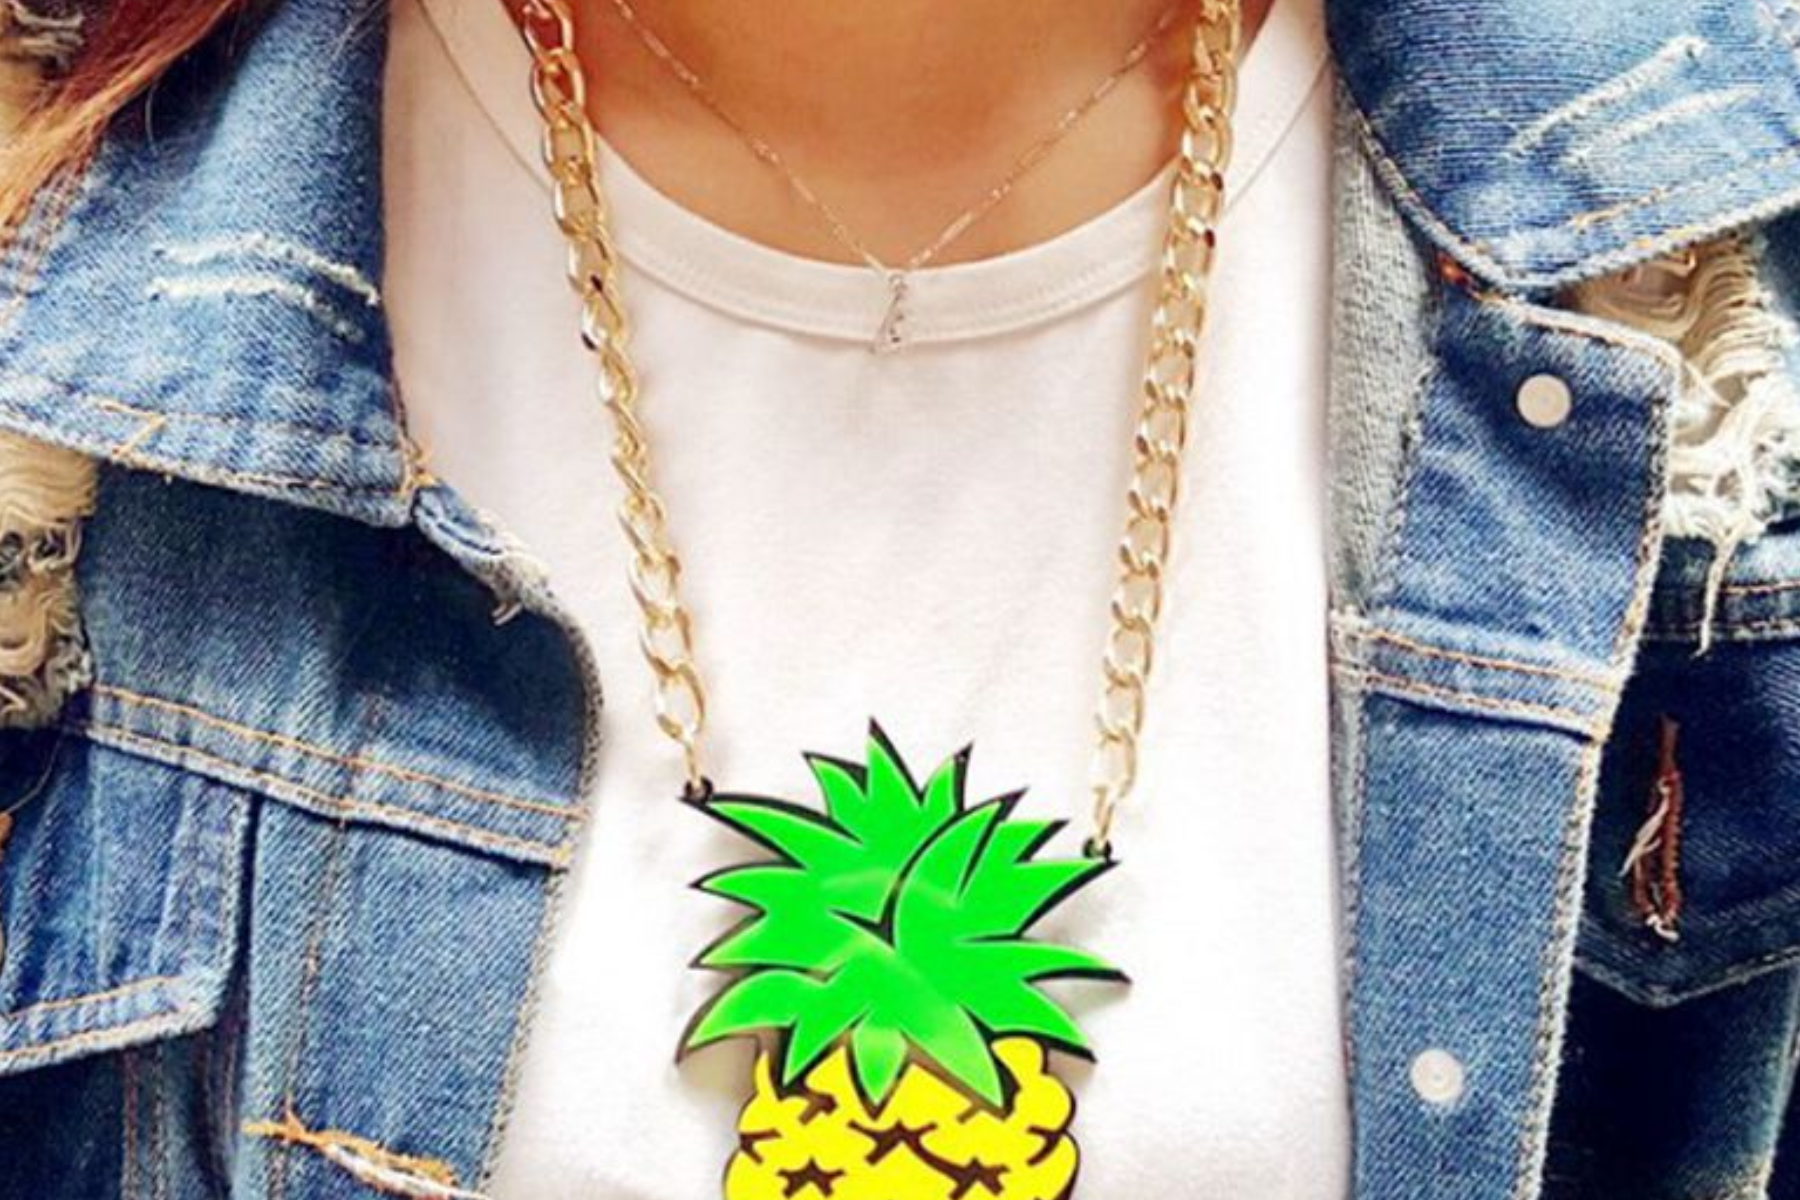 A close-up image of a woman's torso wearing a blue jean jacket. The woman is wearing a large pineapple pendant on a gold chain around her neck